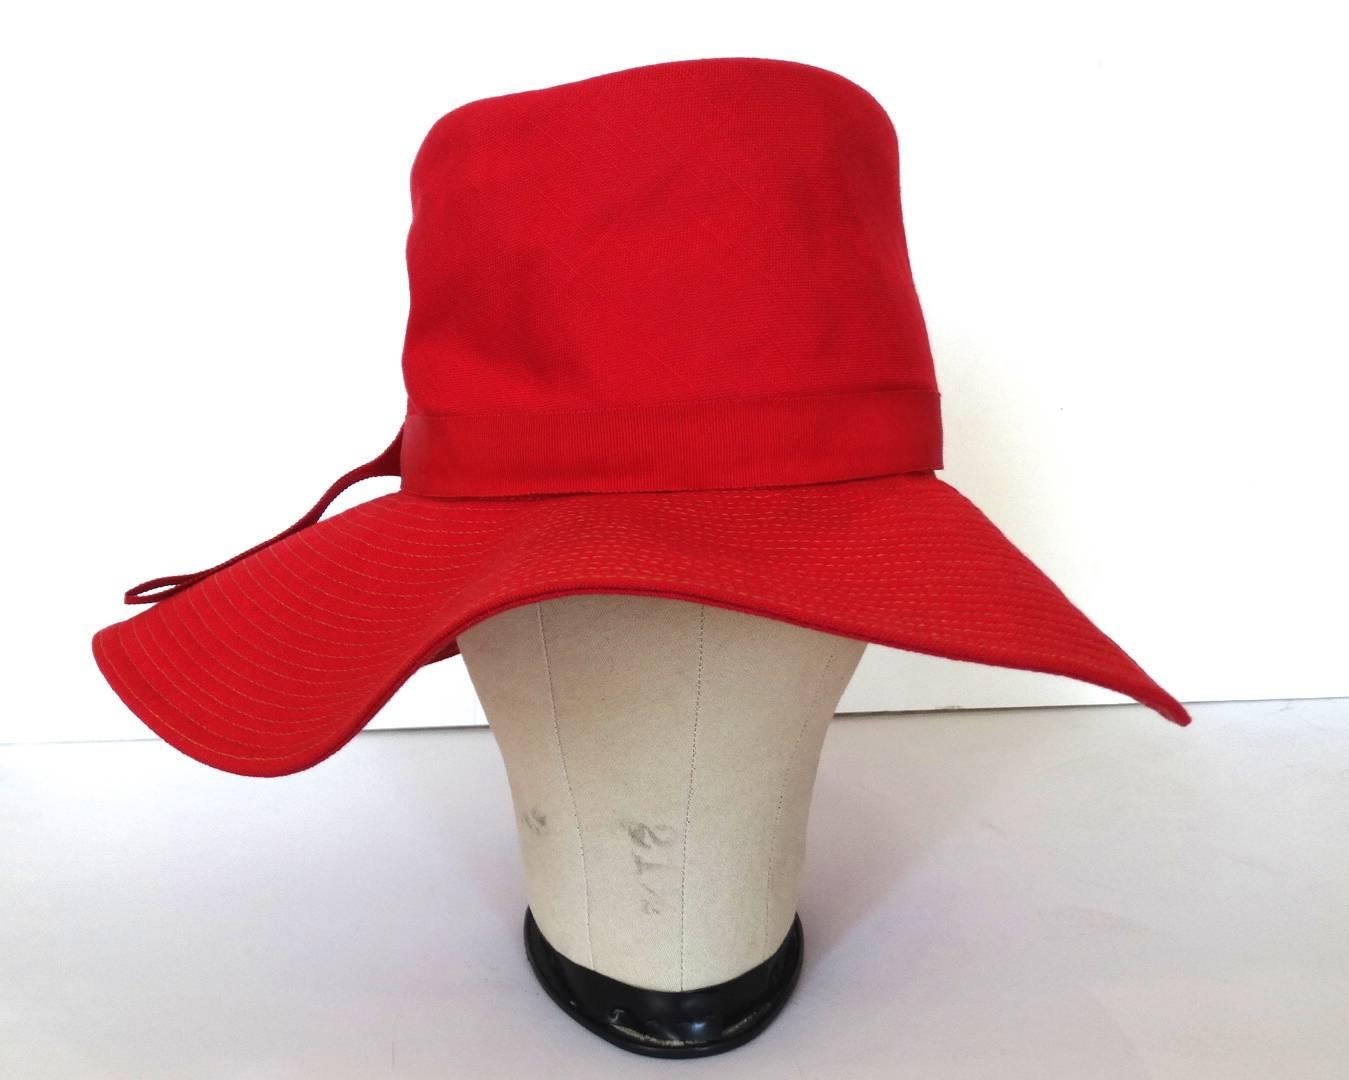 Your perfect summer hat has arrived with our red cotton & raffia hat! From The Paris Boutique, this eye-catching vintage hat is made of a thick red cotton fabric and brimmed with a red dyed woven raffia. Matching red cotton bow affixed at the base